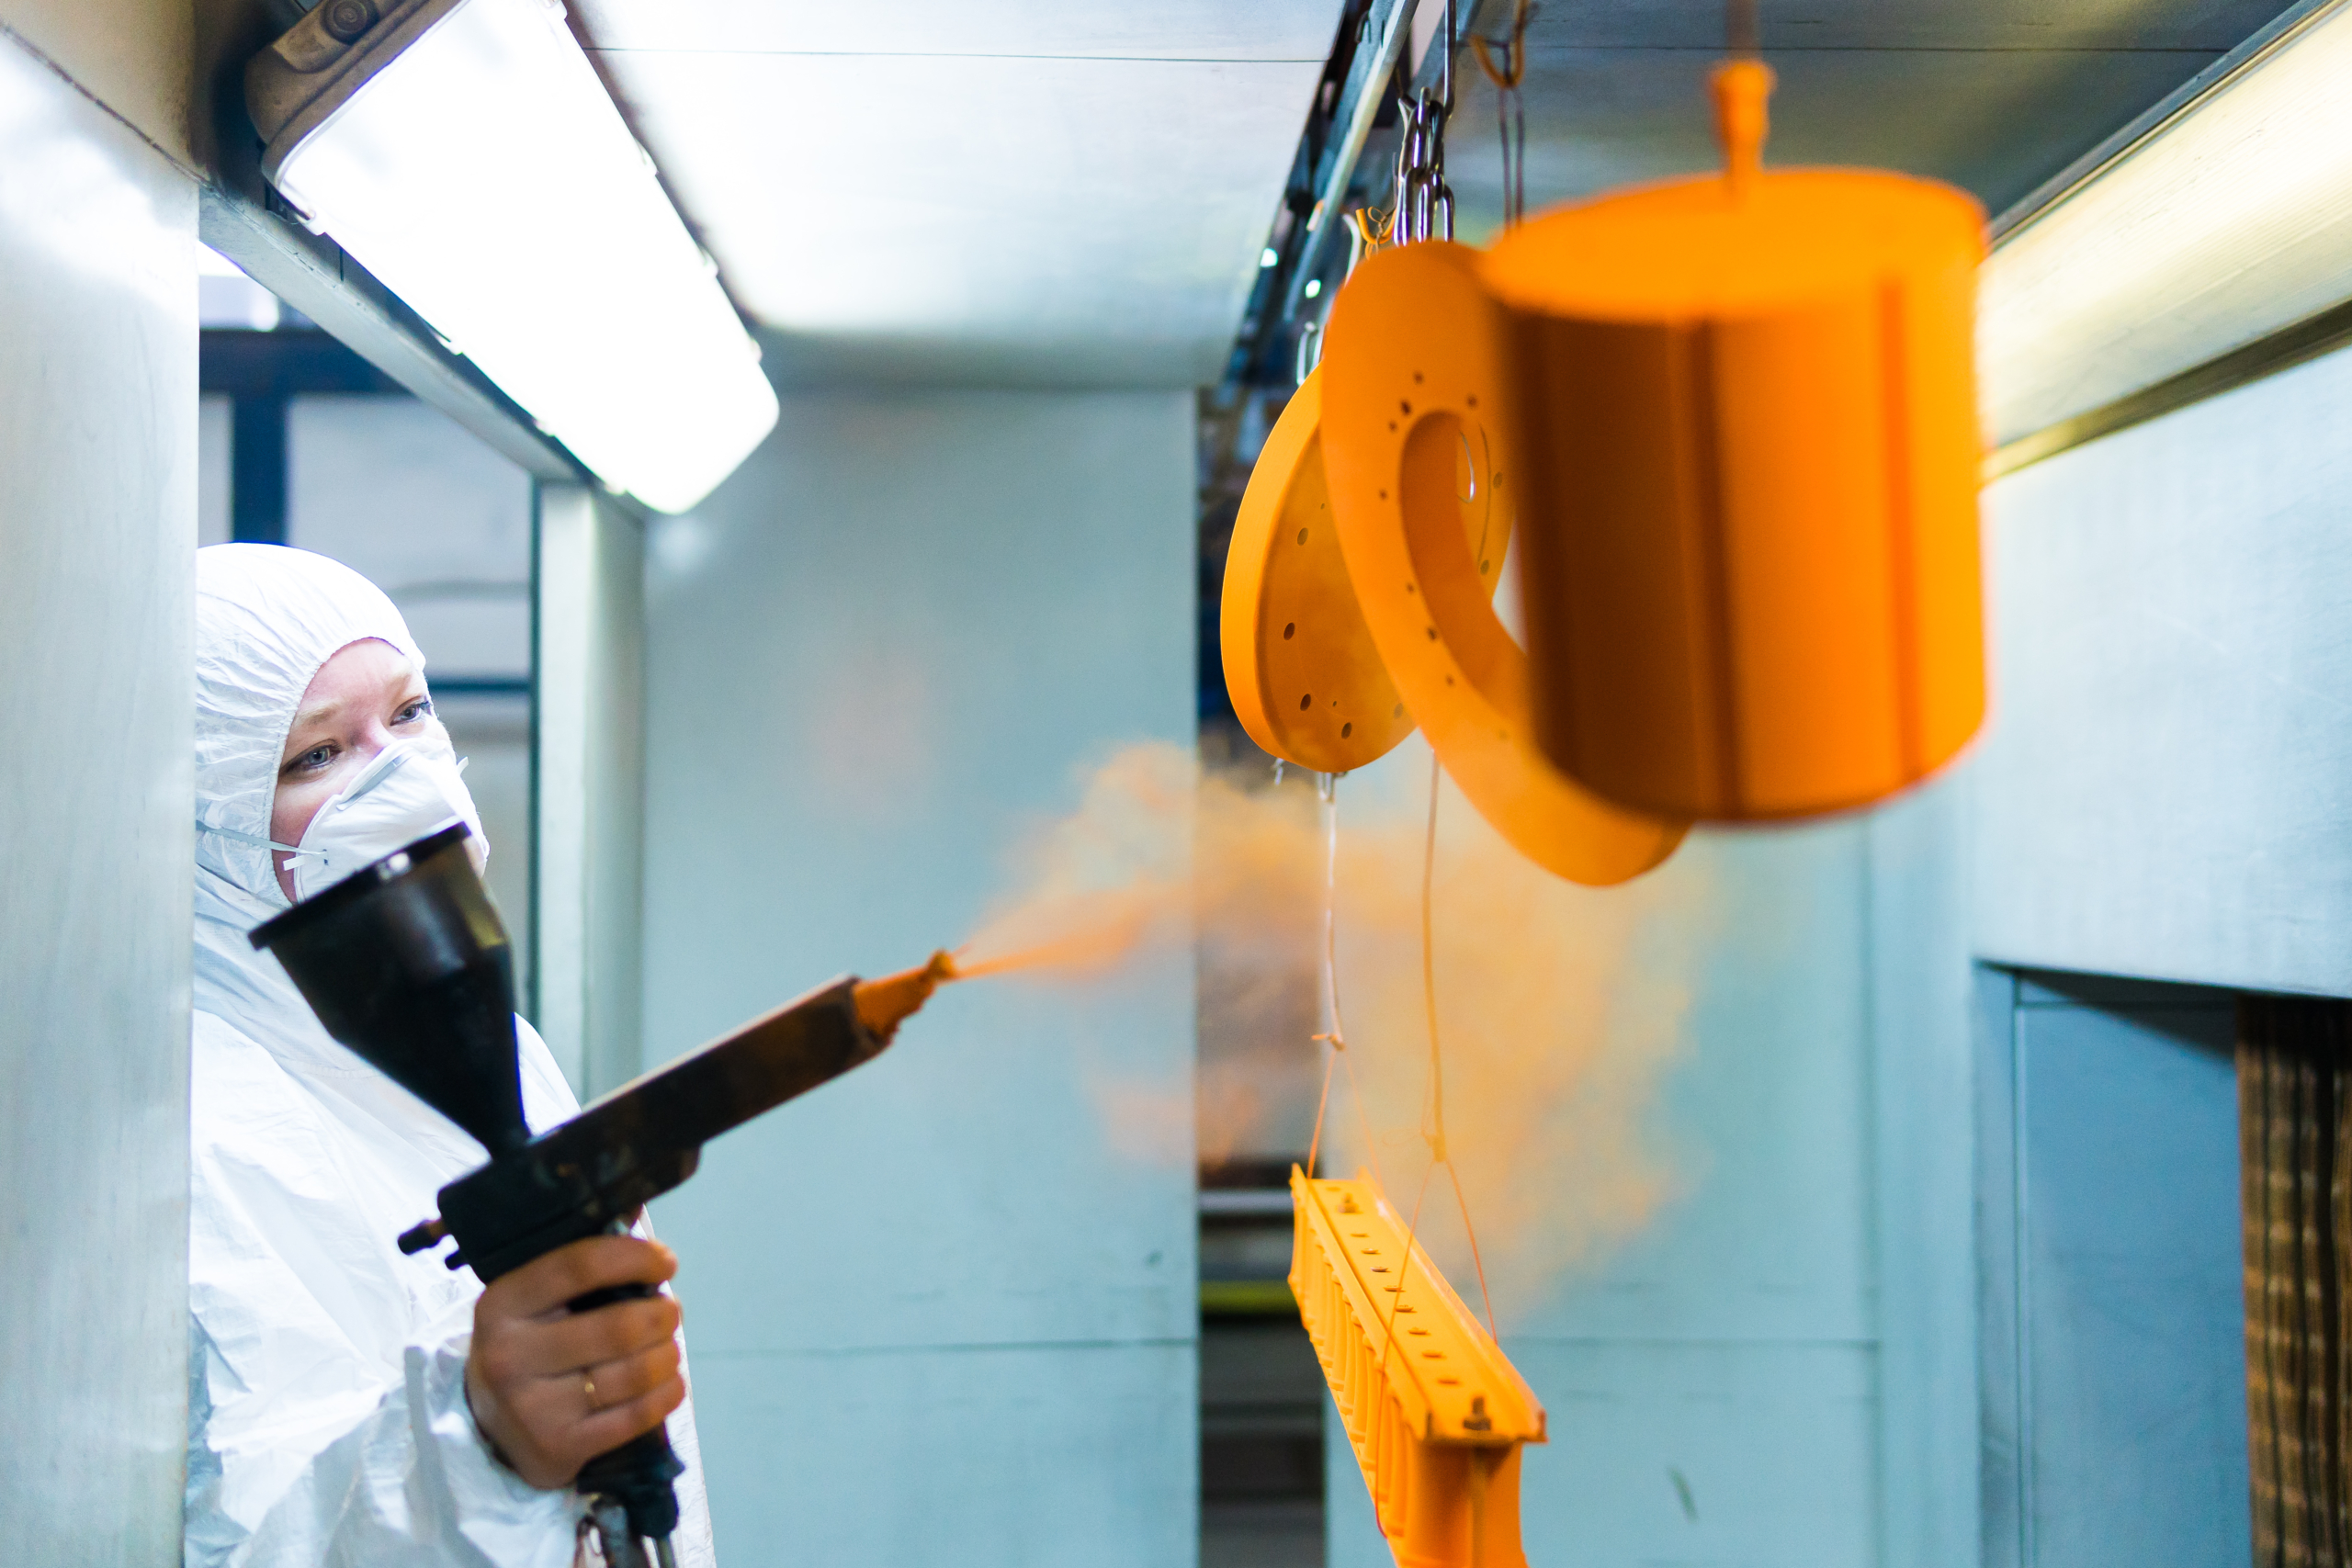 Powder Coating vs. Traditional Paint: Why Powder Coating is the Best